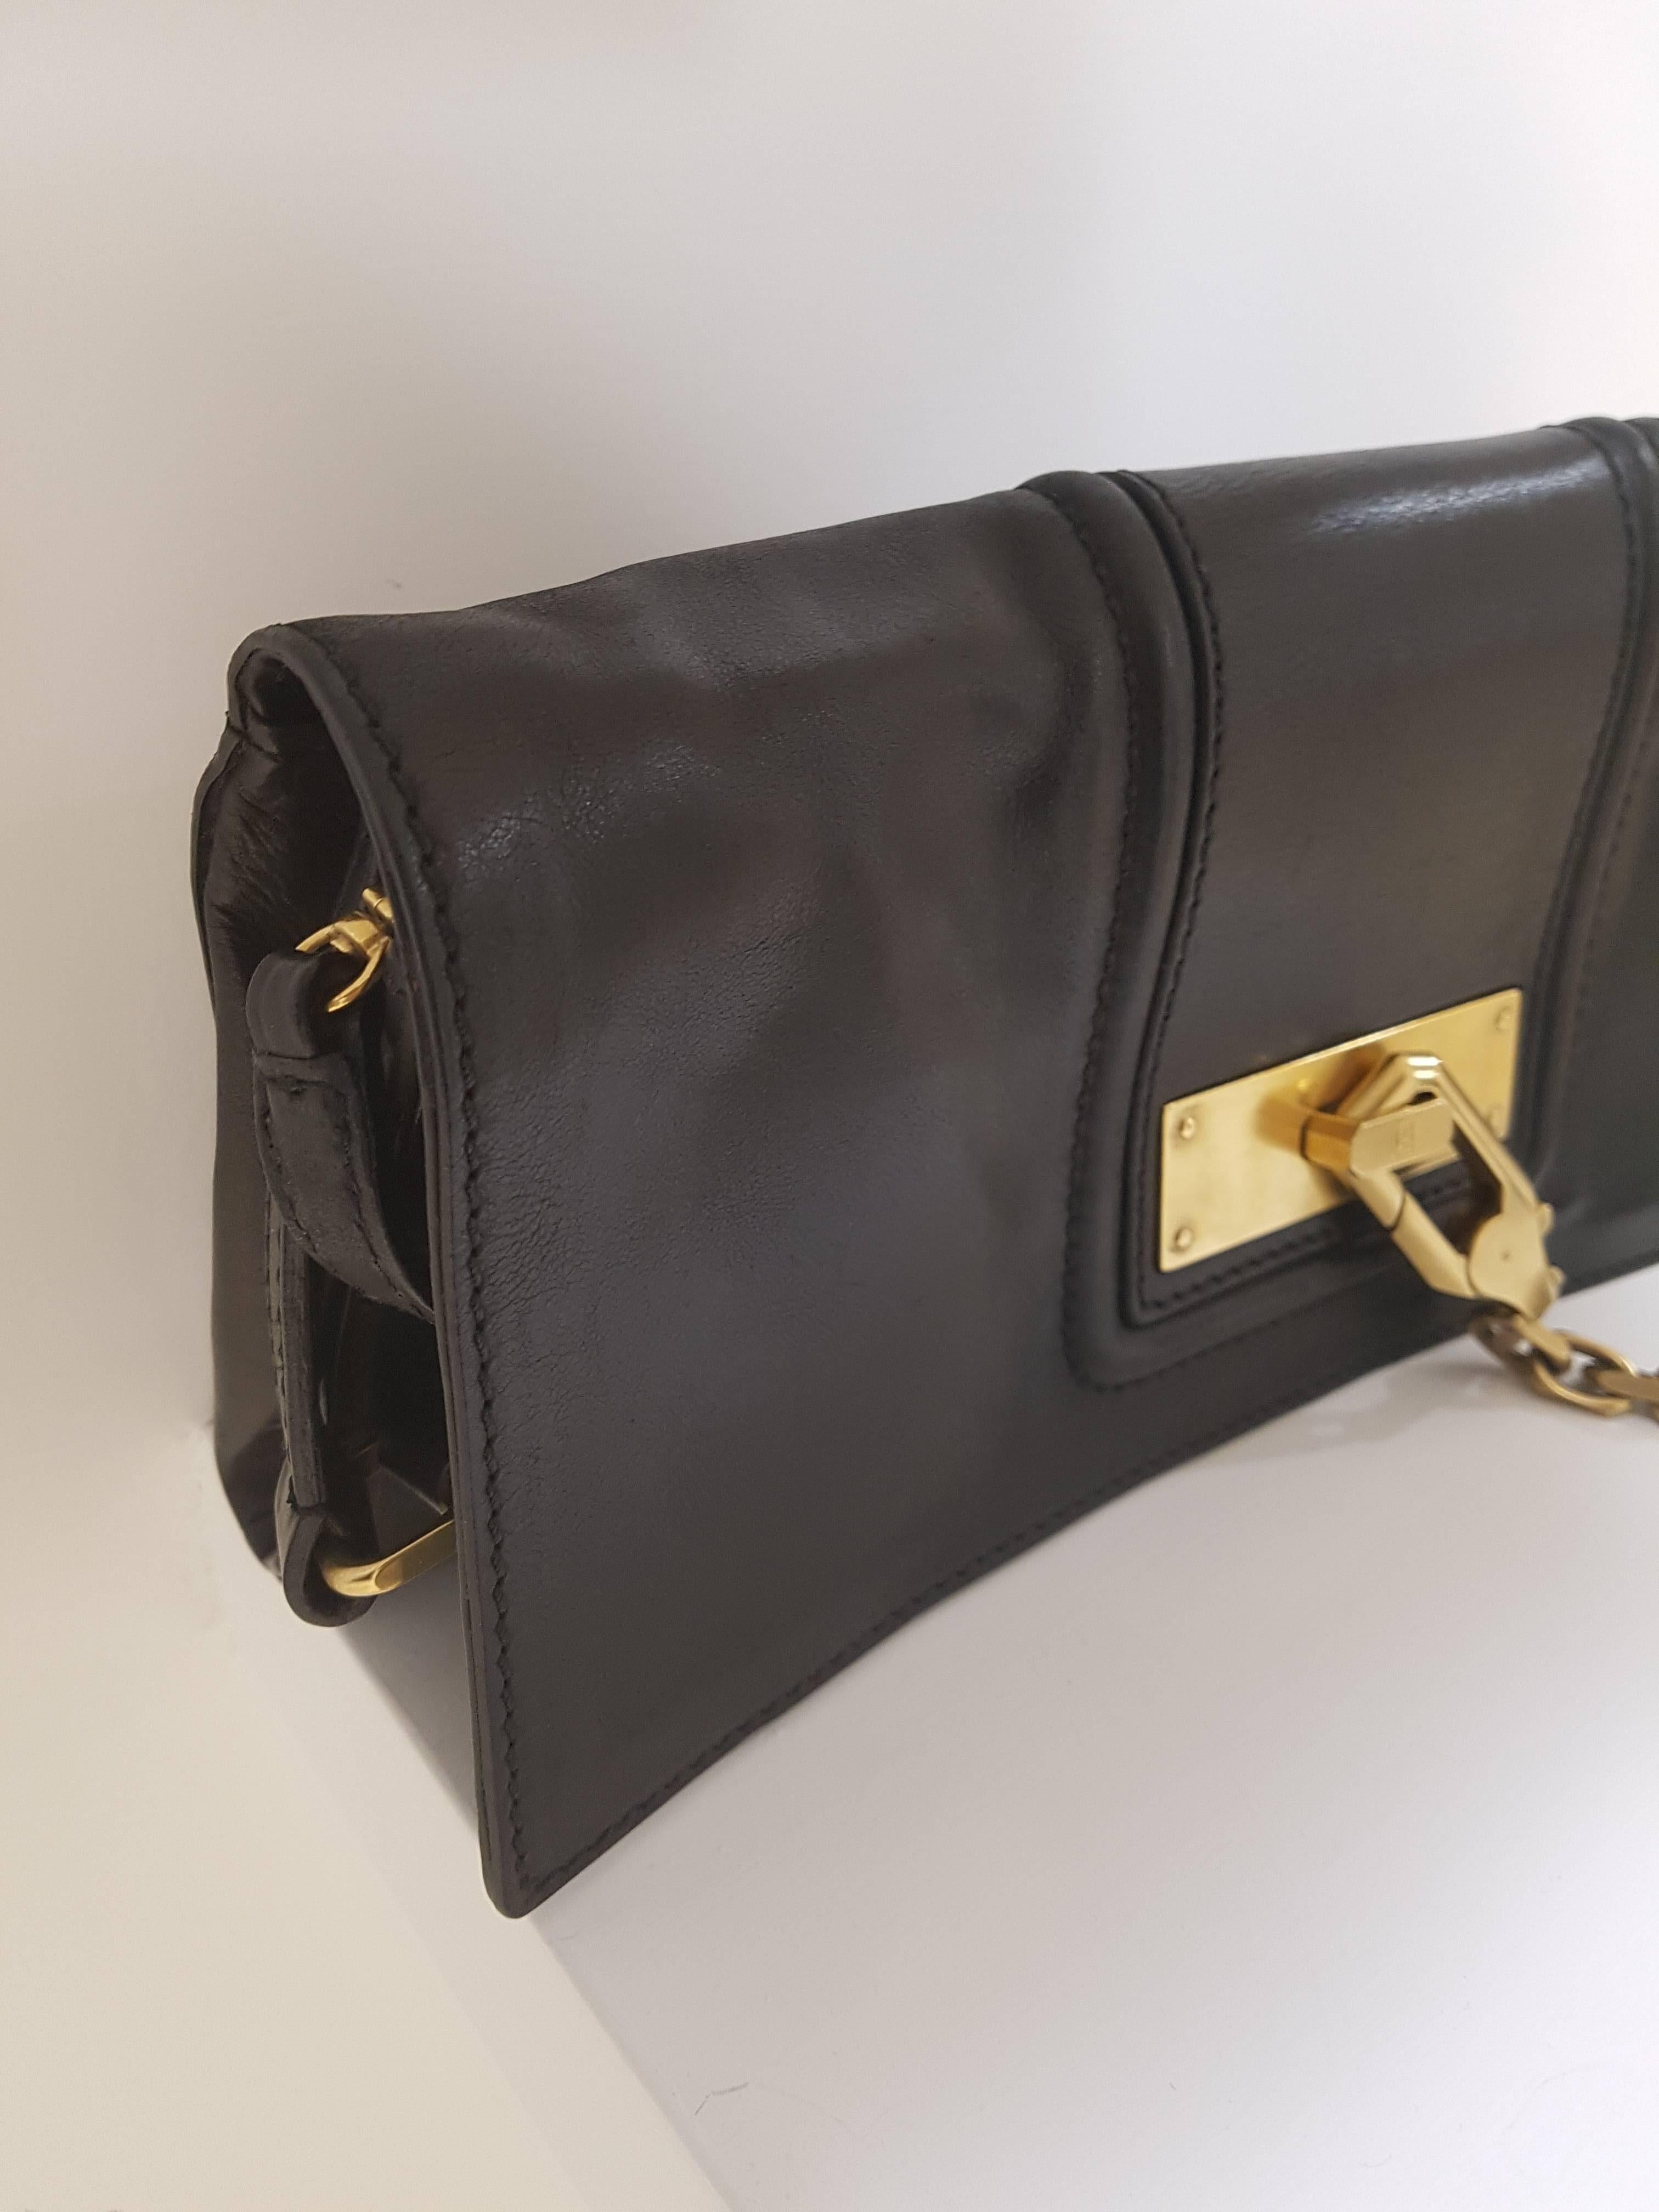 Escada Black Leather Bag

with gold tone chain and lock 
in the inside long black leather shoulder strap

can be worn as a clutch or as a shoulder bag